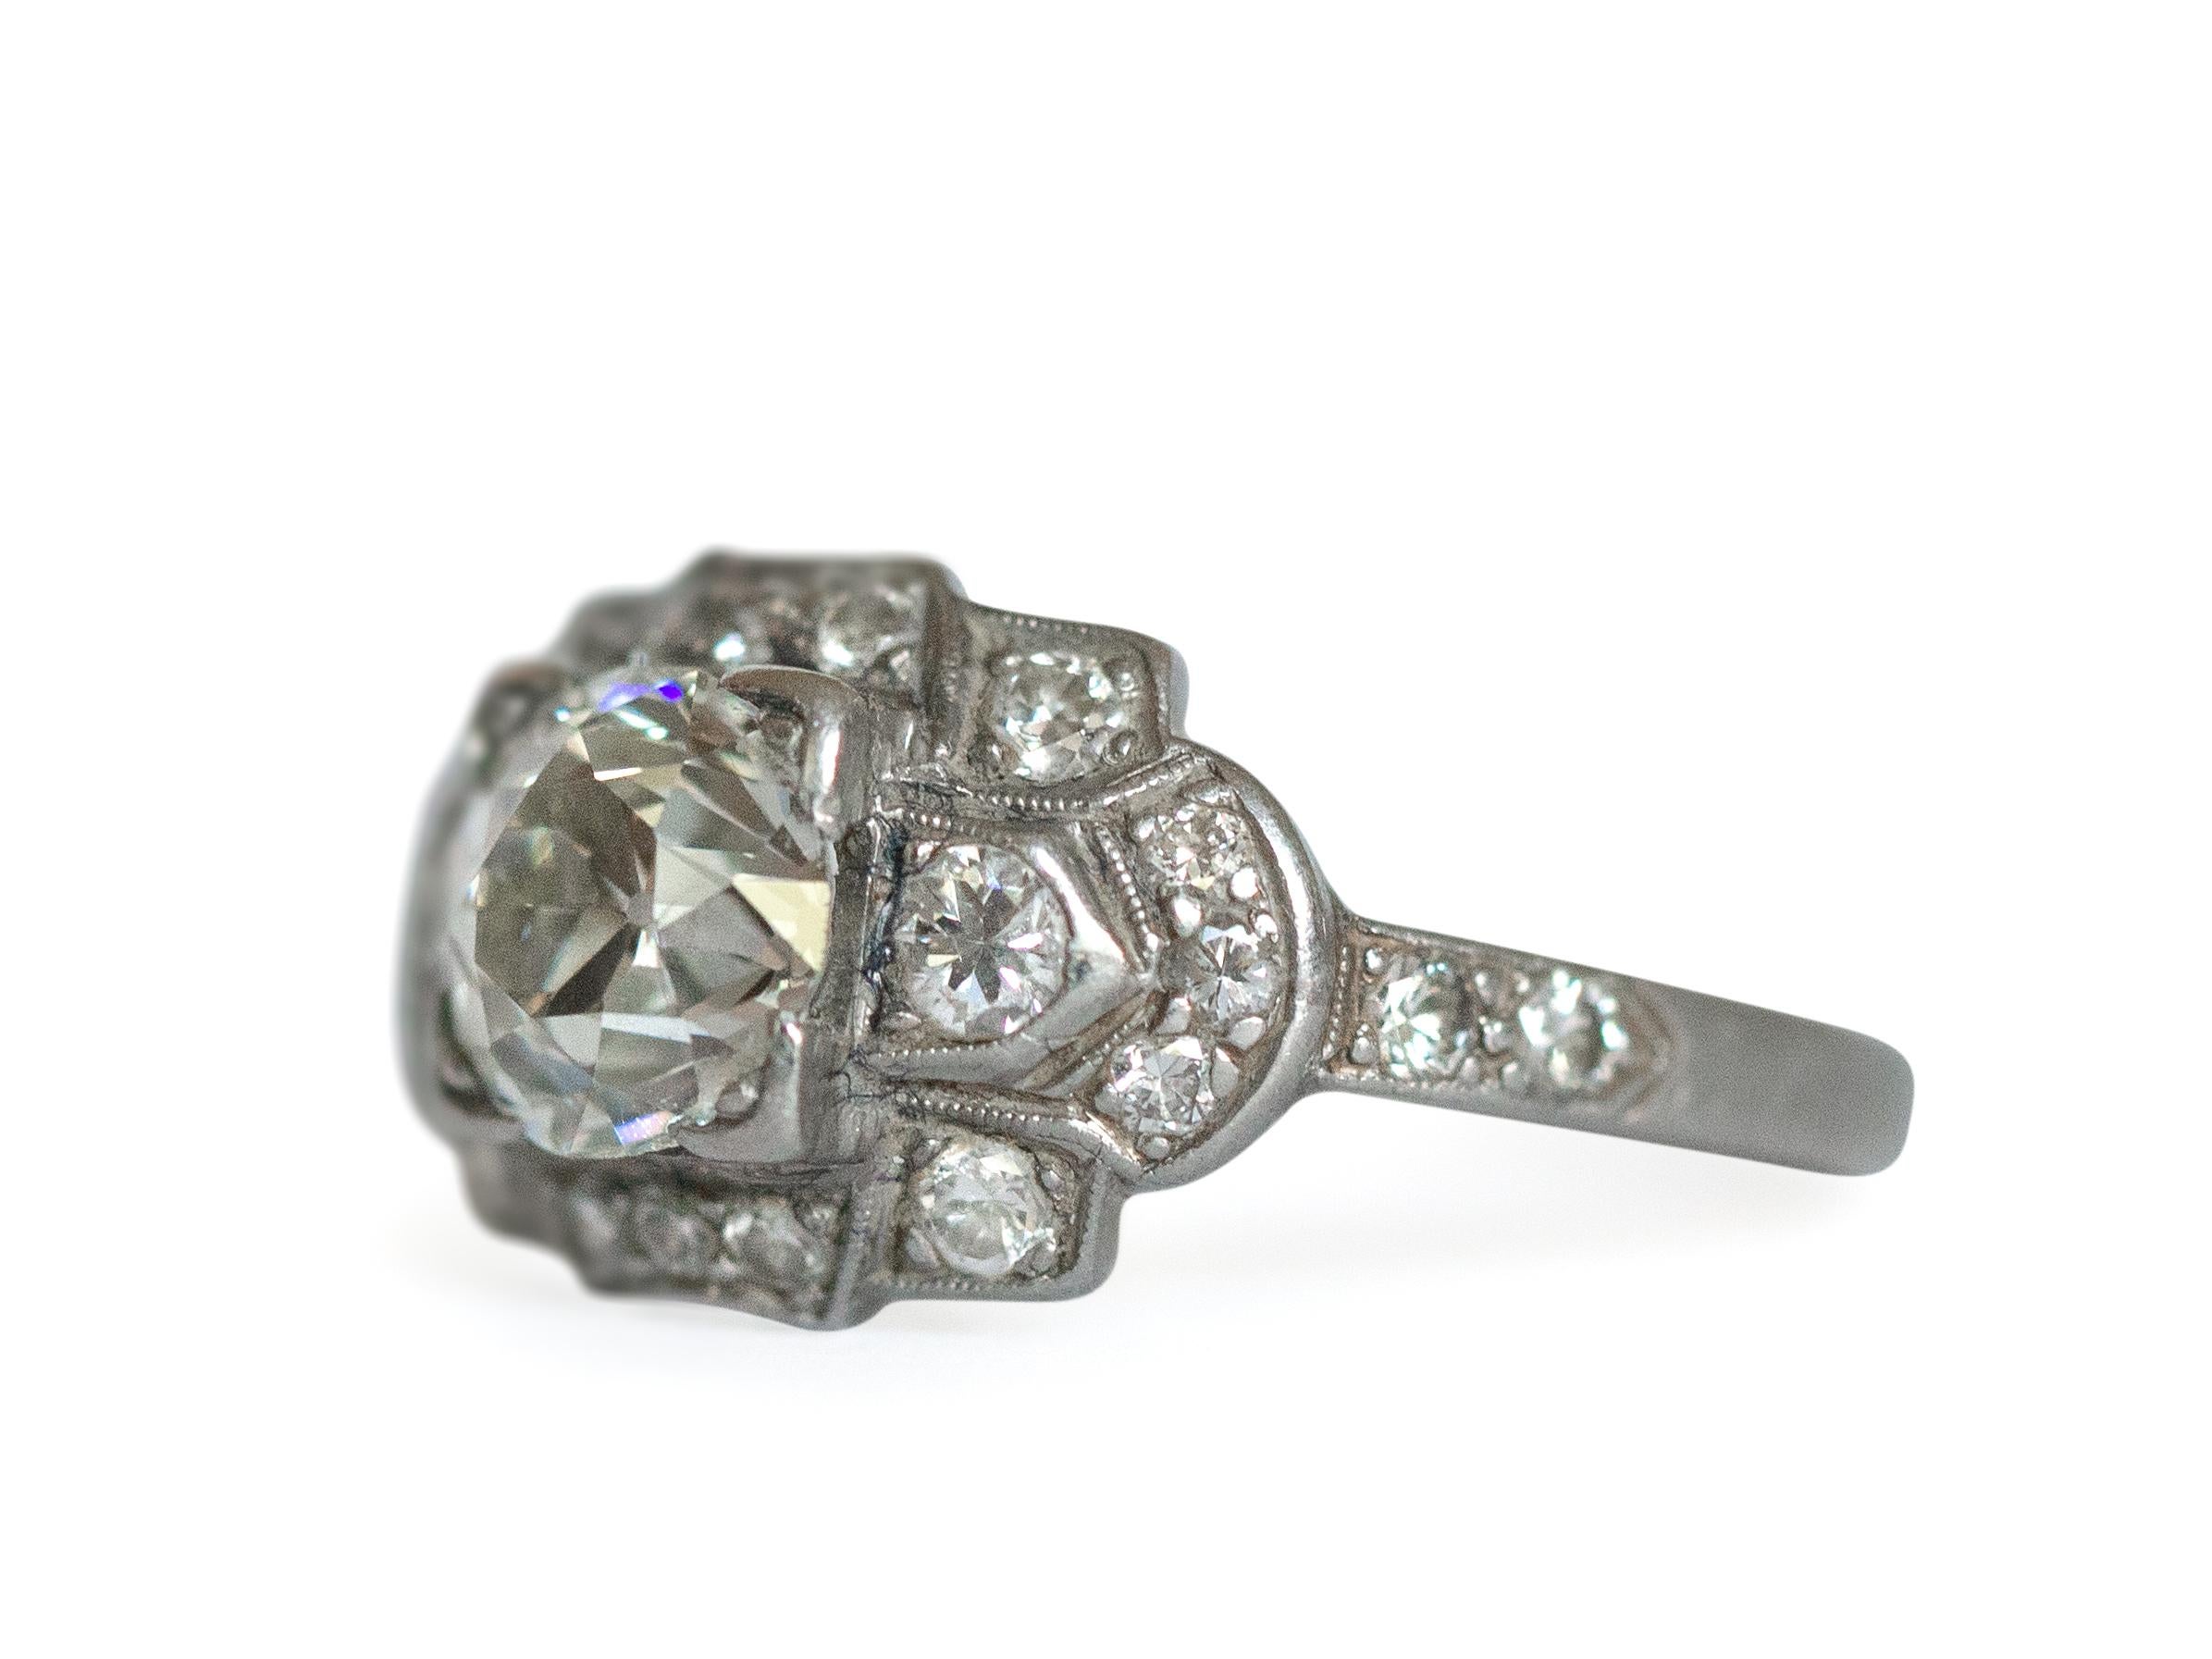 Ring Size: 6
Metal Type: Platinum  [Hallmarked, and Tested]
Weight: 3.5  grams

Center Diamond Details:
Weight: 1.01
Cut: Old European Brilliant
Color: I
Clarity: VS2

Side Diamond Details:
Weight: .30 carat, total weight
Cut: Old European